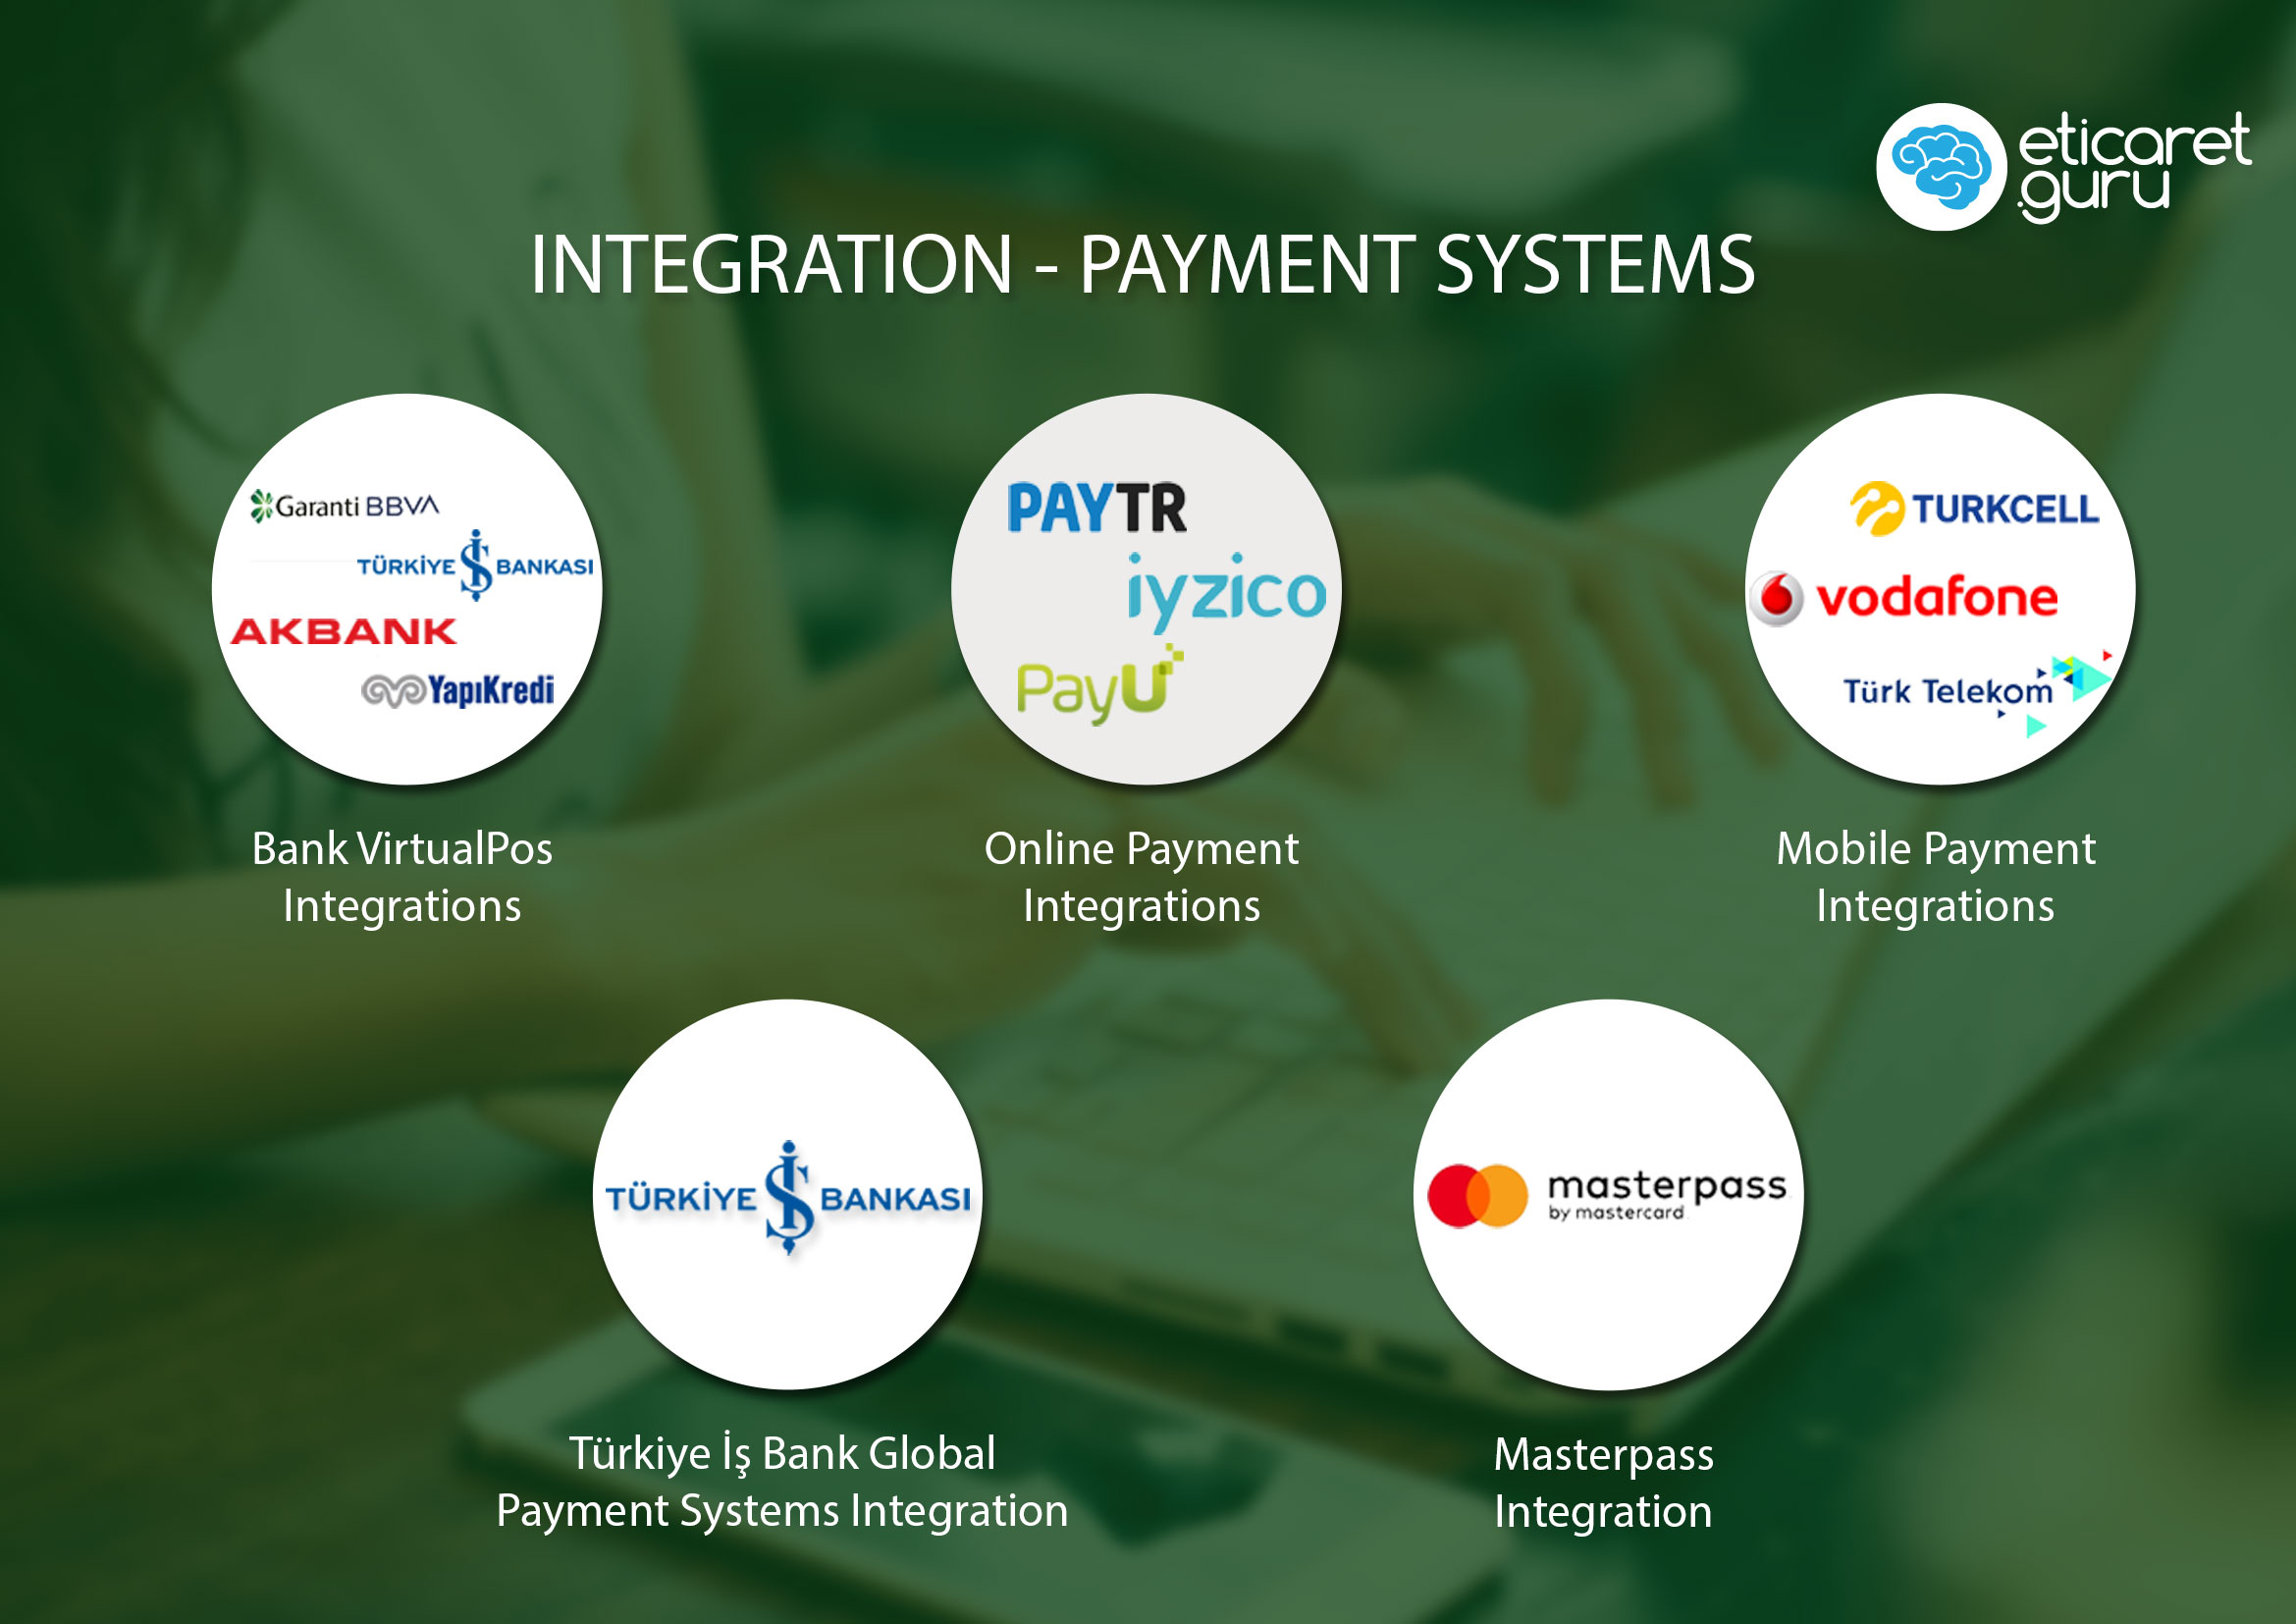 INTEGRATION - PAYMENT SYSTEMS